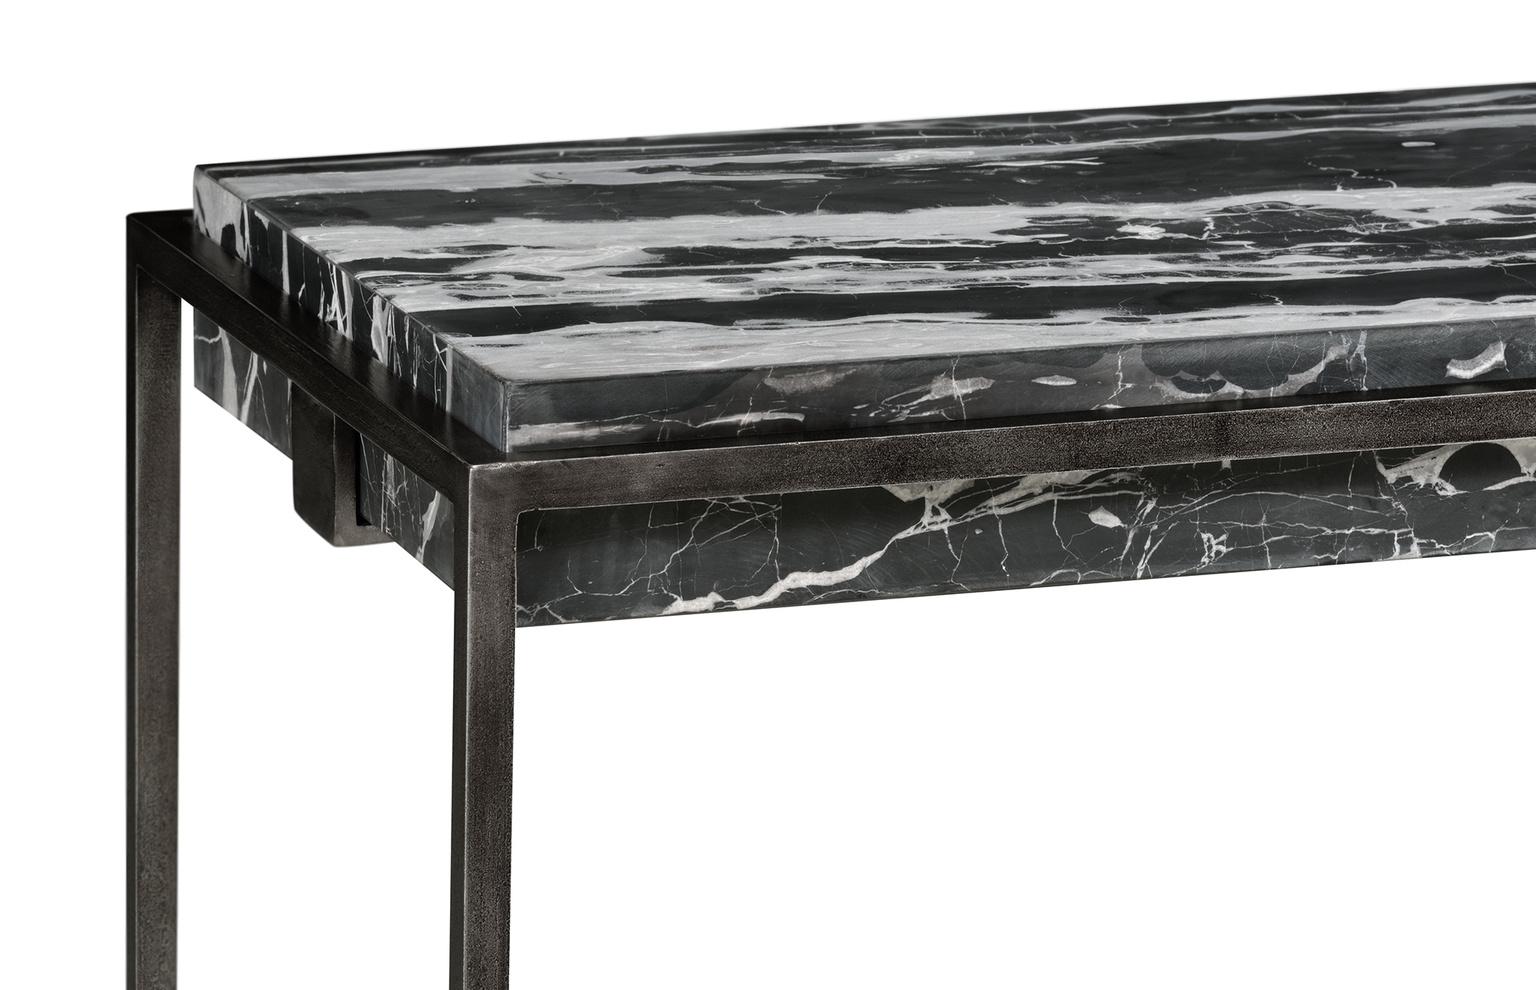 Available as a set of two tables, each contemporary piece features a frame in antique pewter iron and a black marble top. Each set is comprised of one rectangular table and one square table, at the same height, the tables can be artistically placed